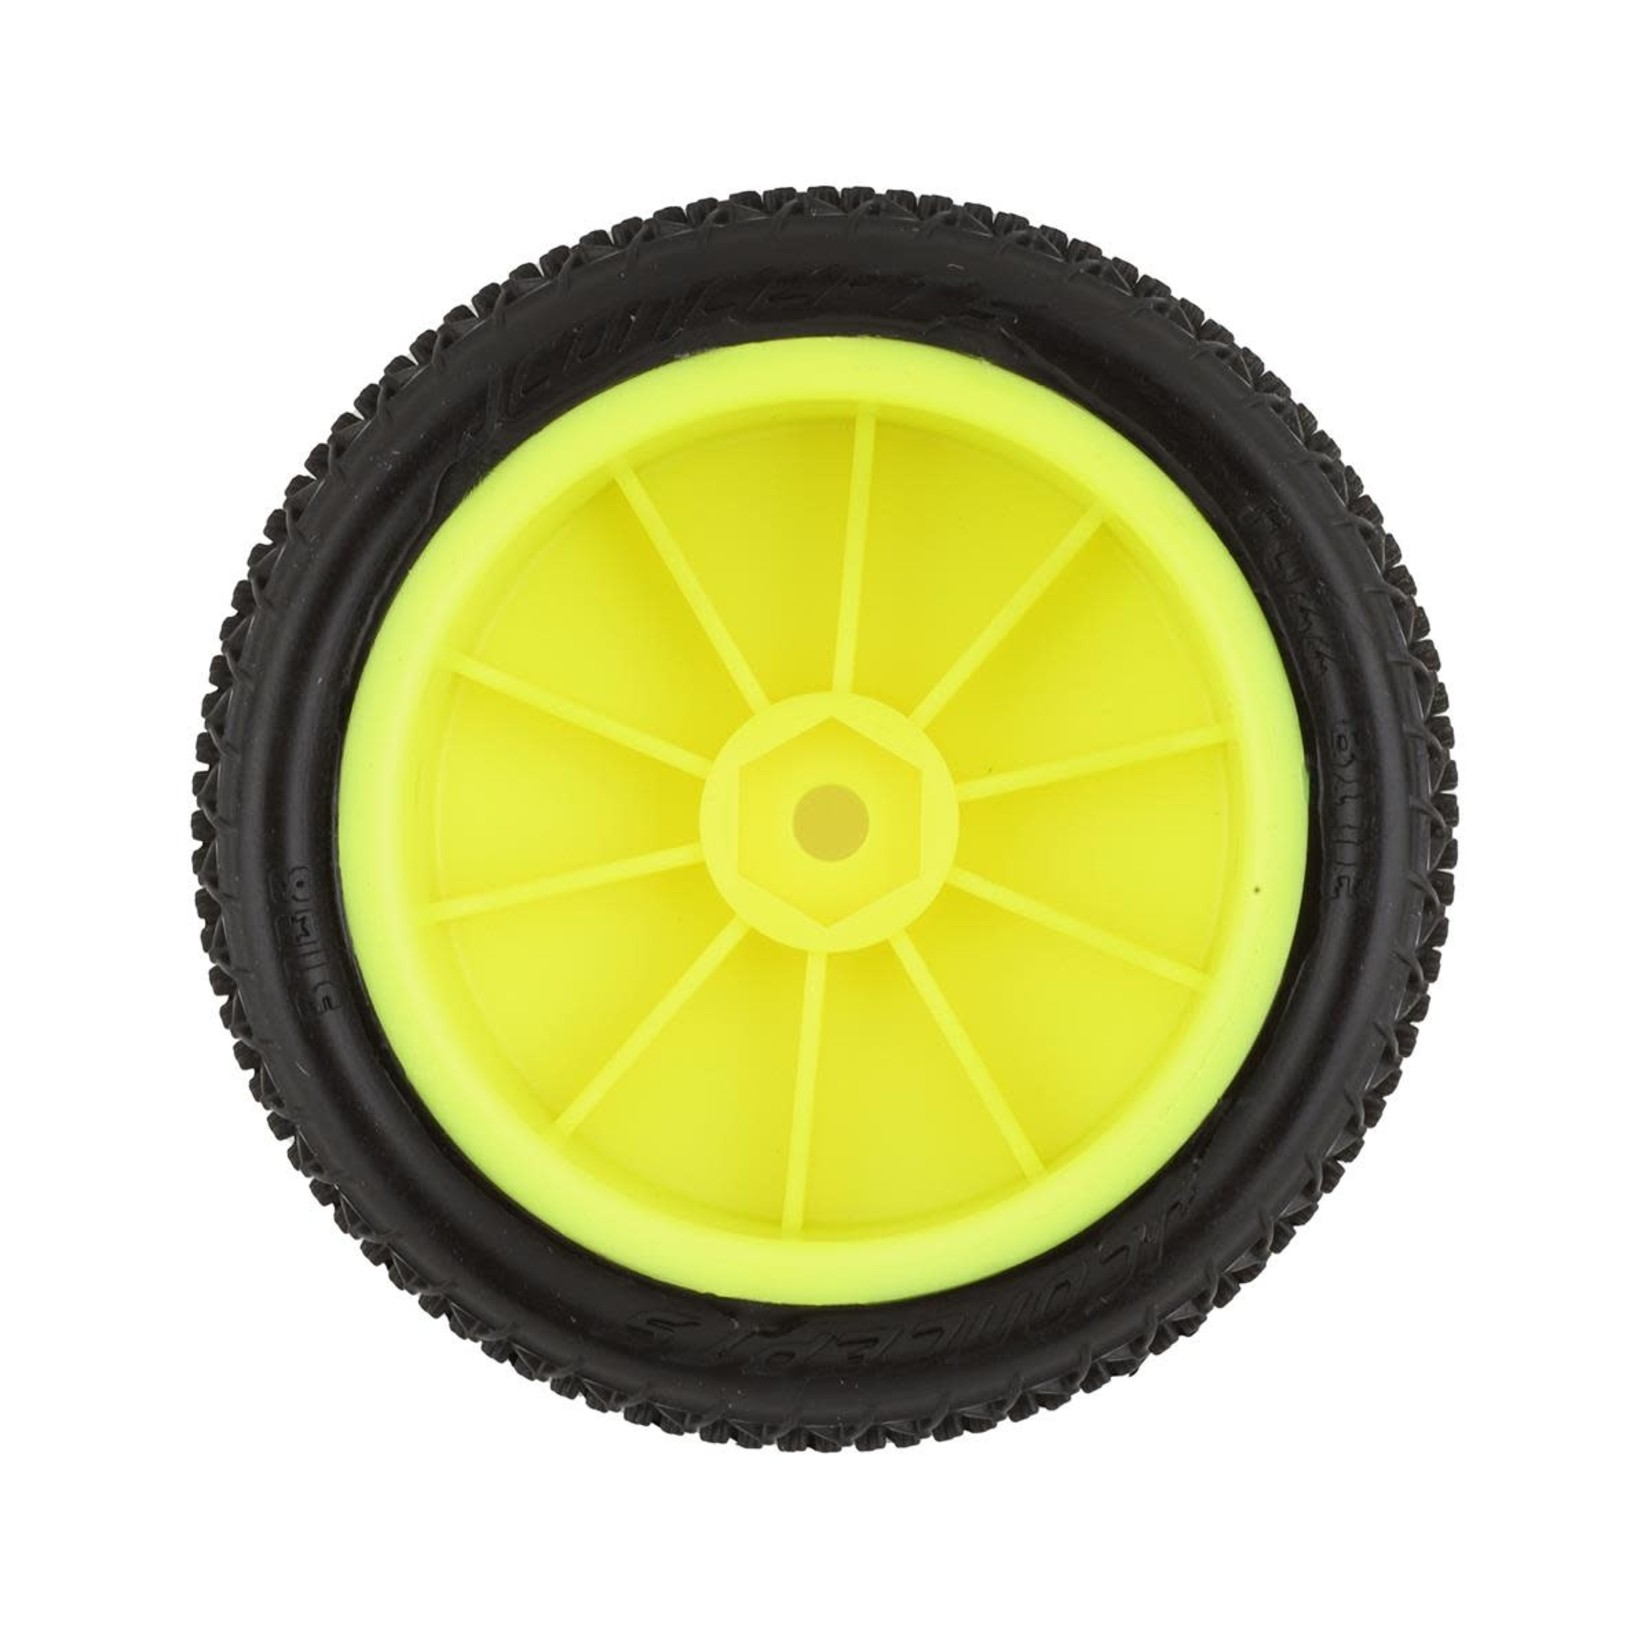 JConcepts JConcepts Fuzz Bite LP 2.2" Pre-Mounted 4WD Front Buggy Tire (Yellow) (2) (Pink) w/12mm Hex #3108-201011